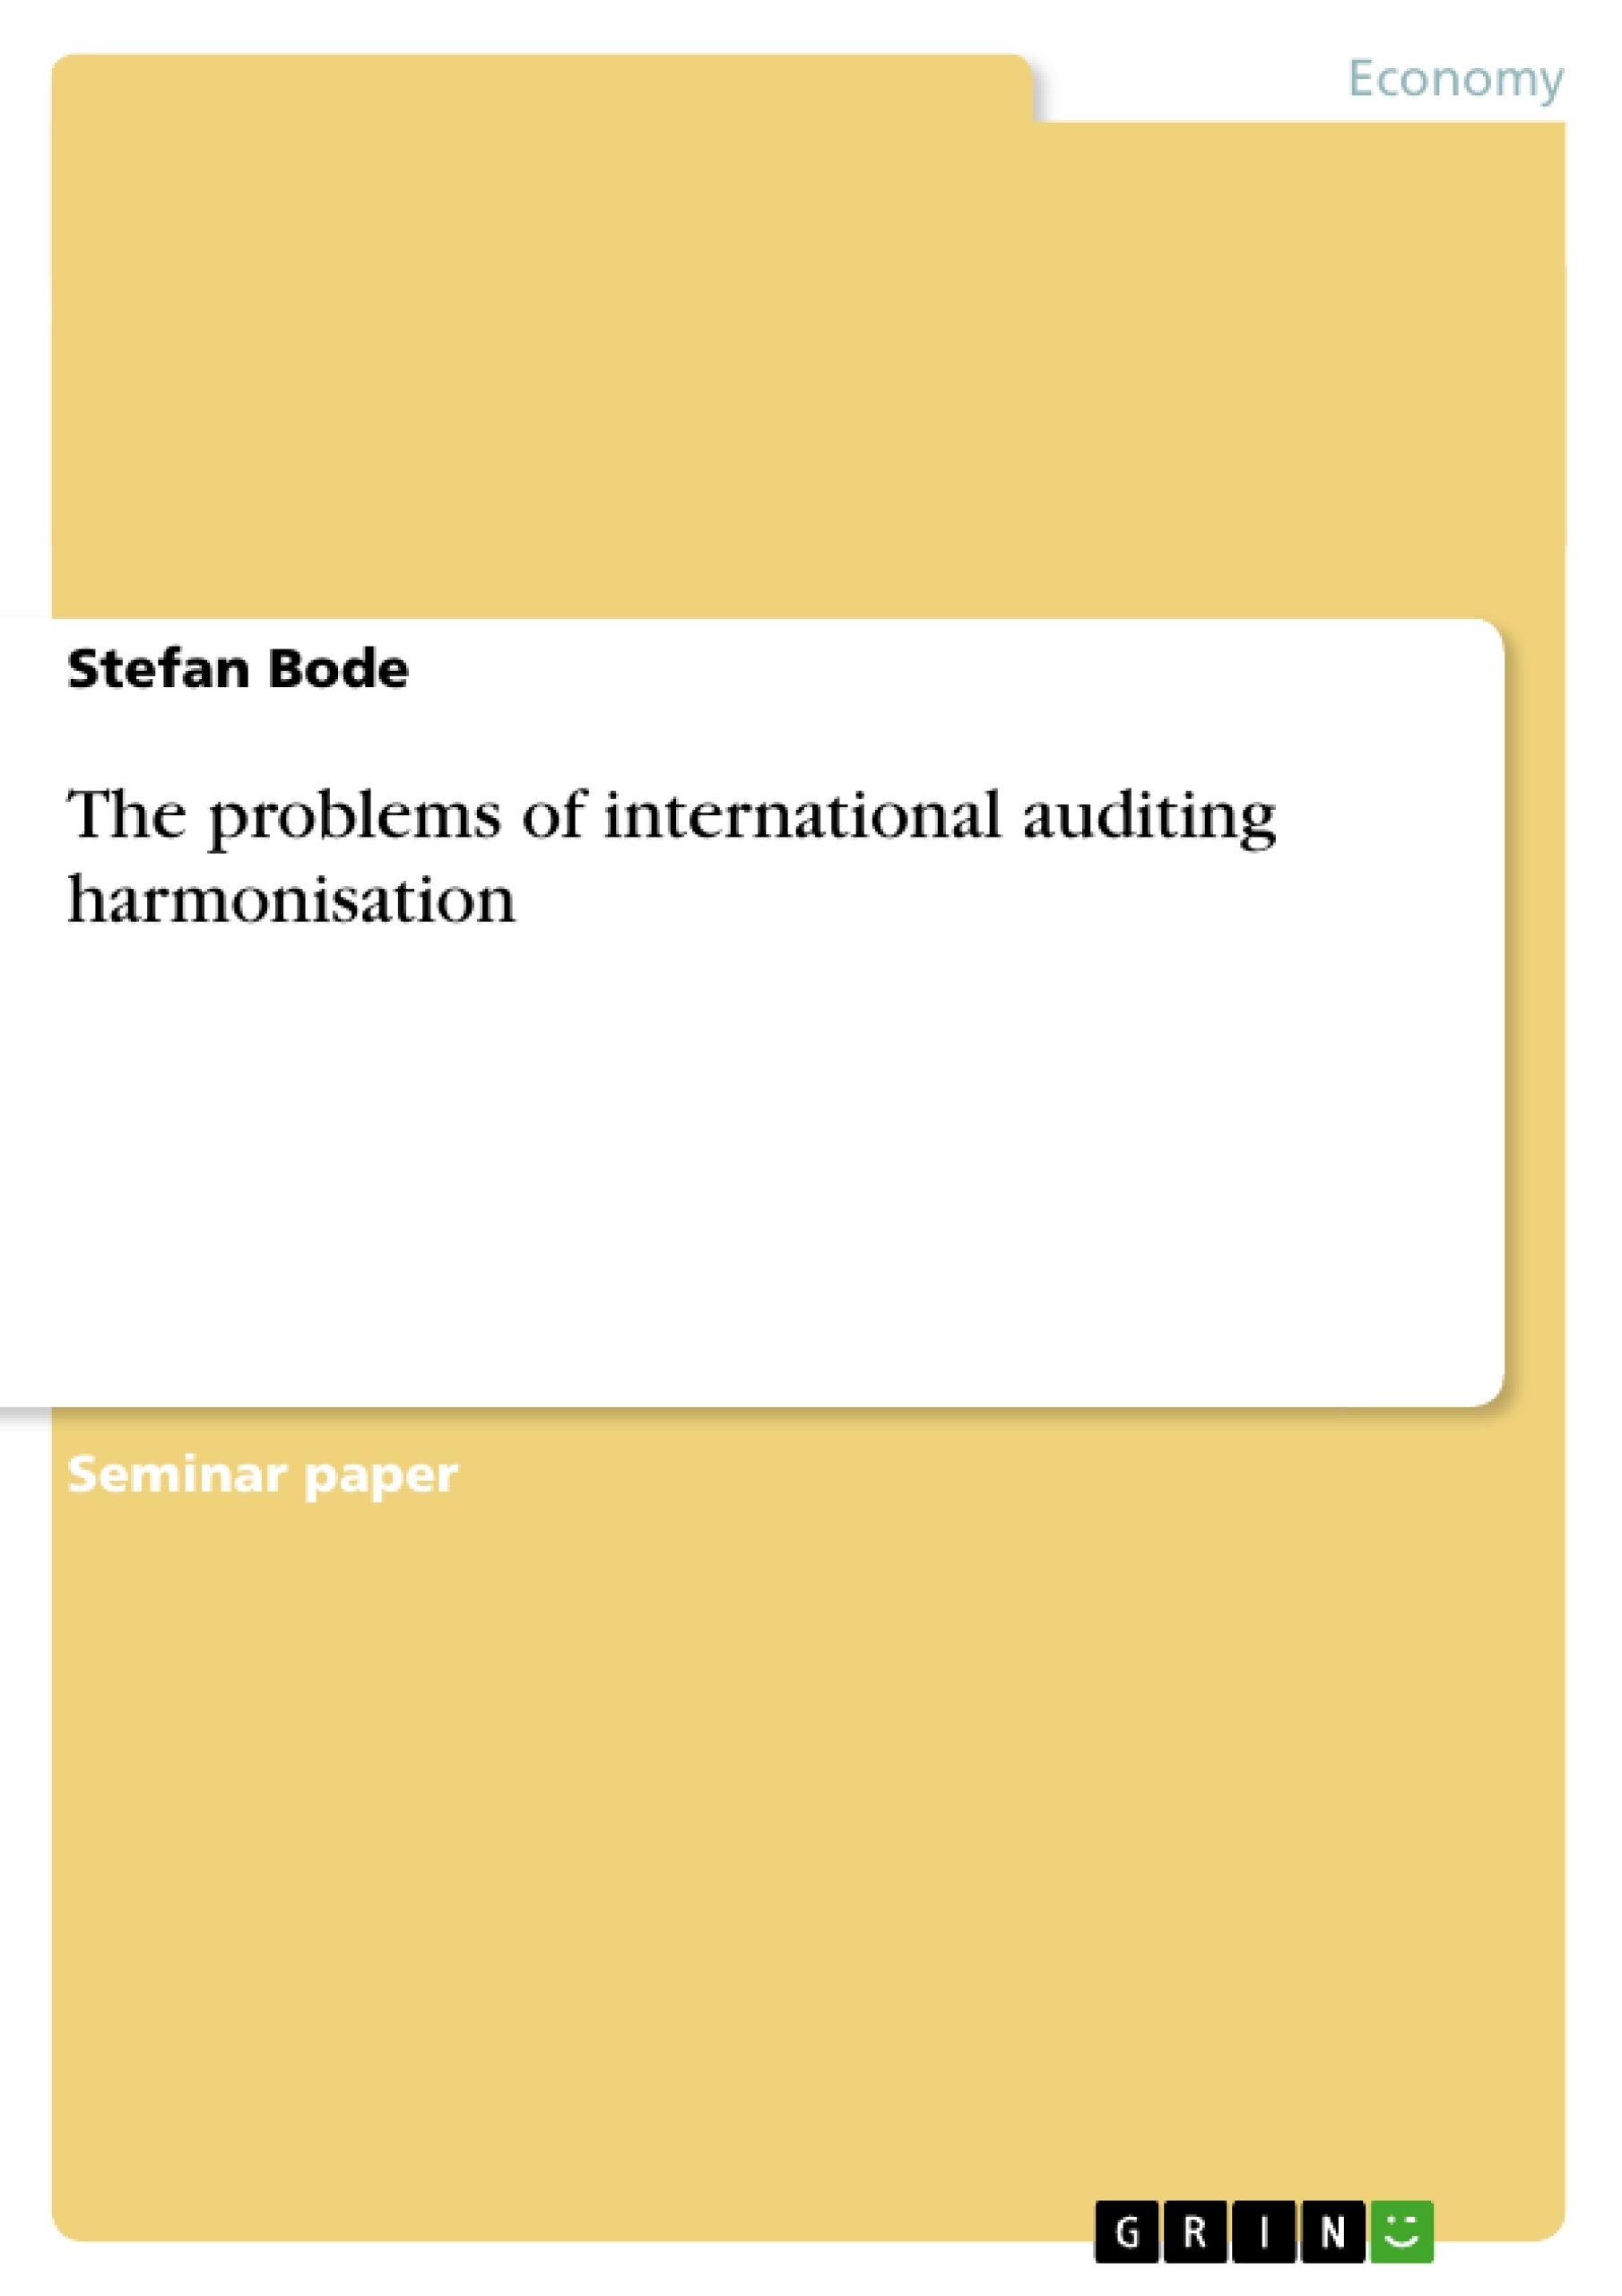 Title: The problems of international auditing harmonisation